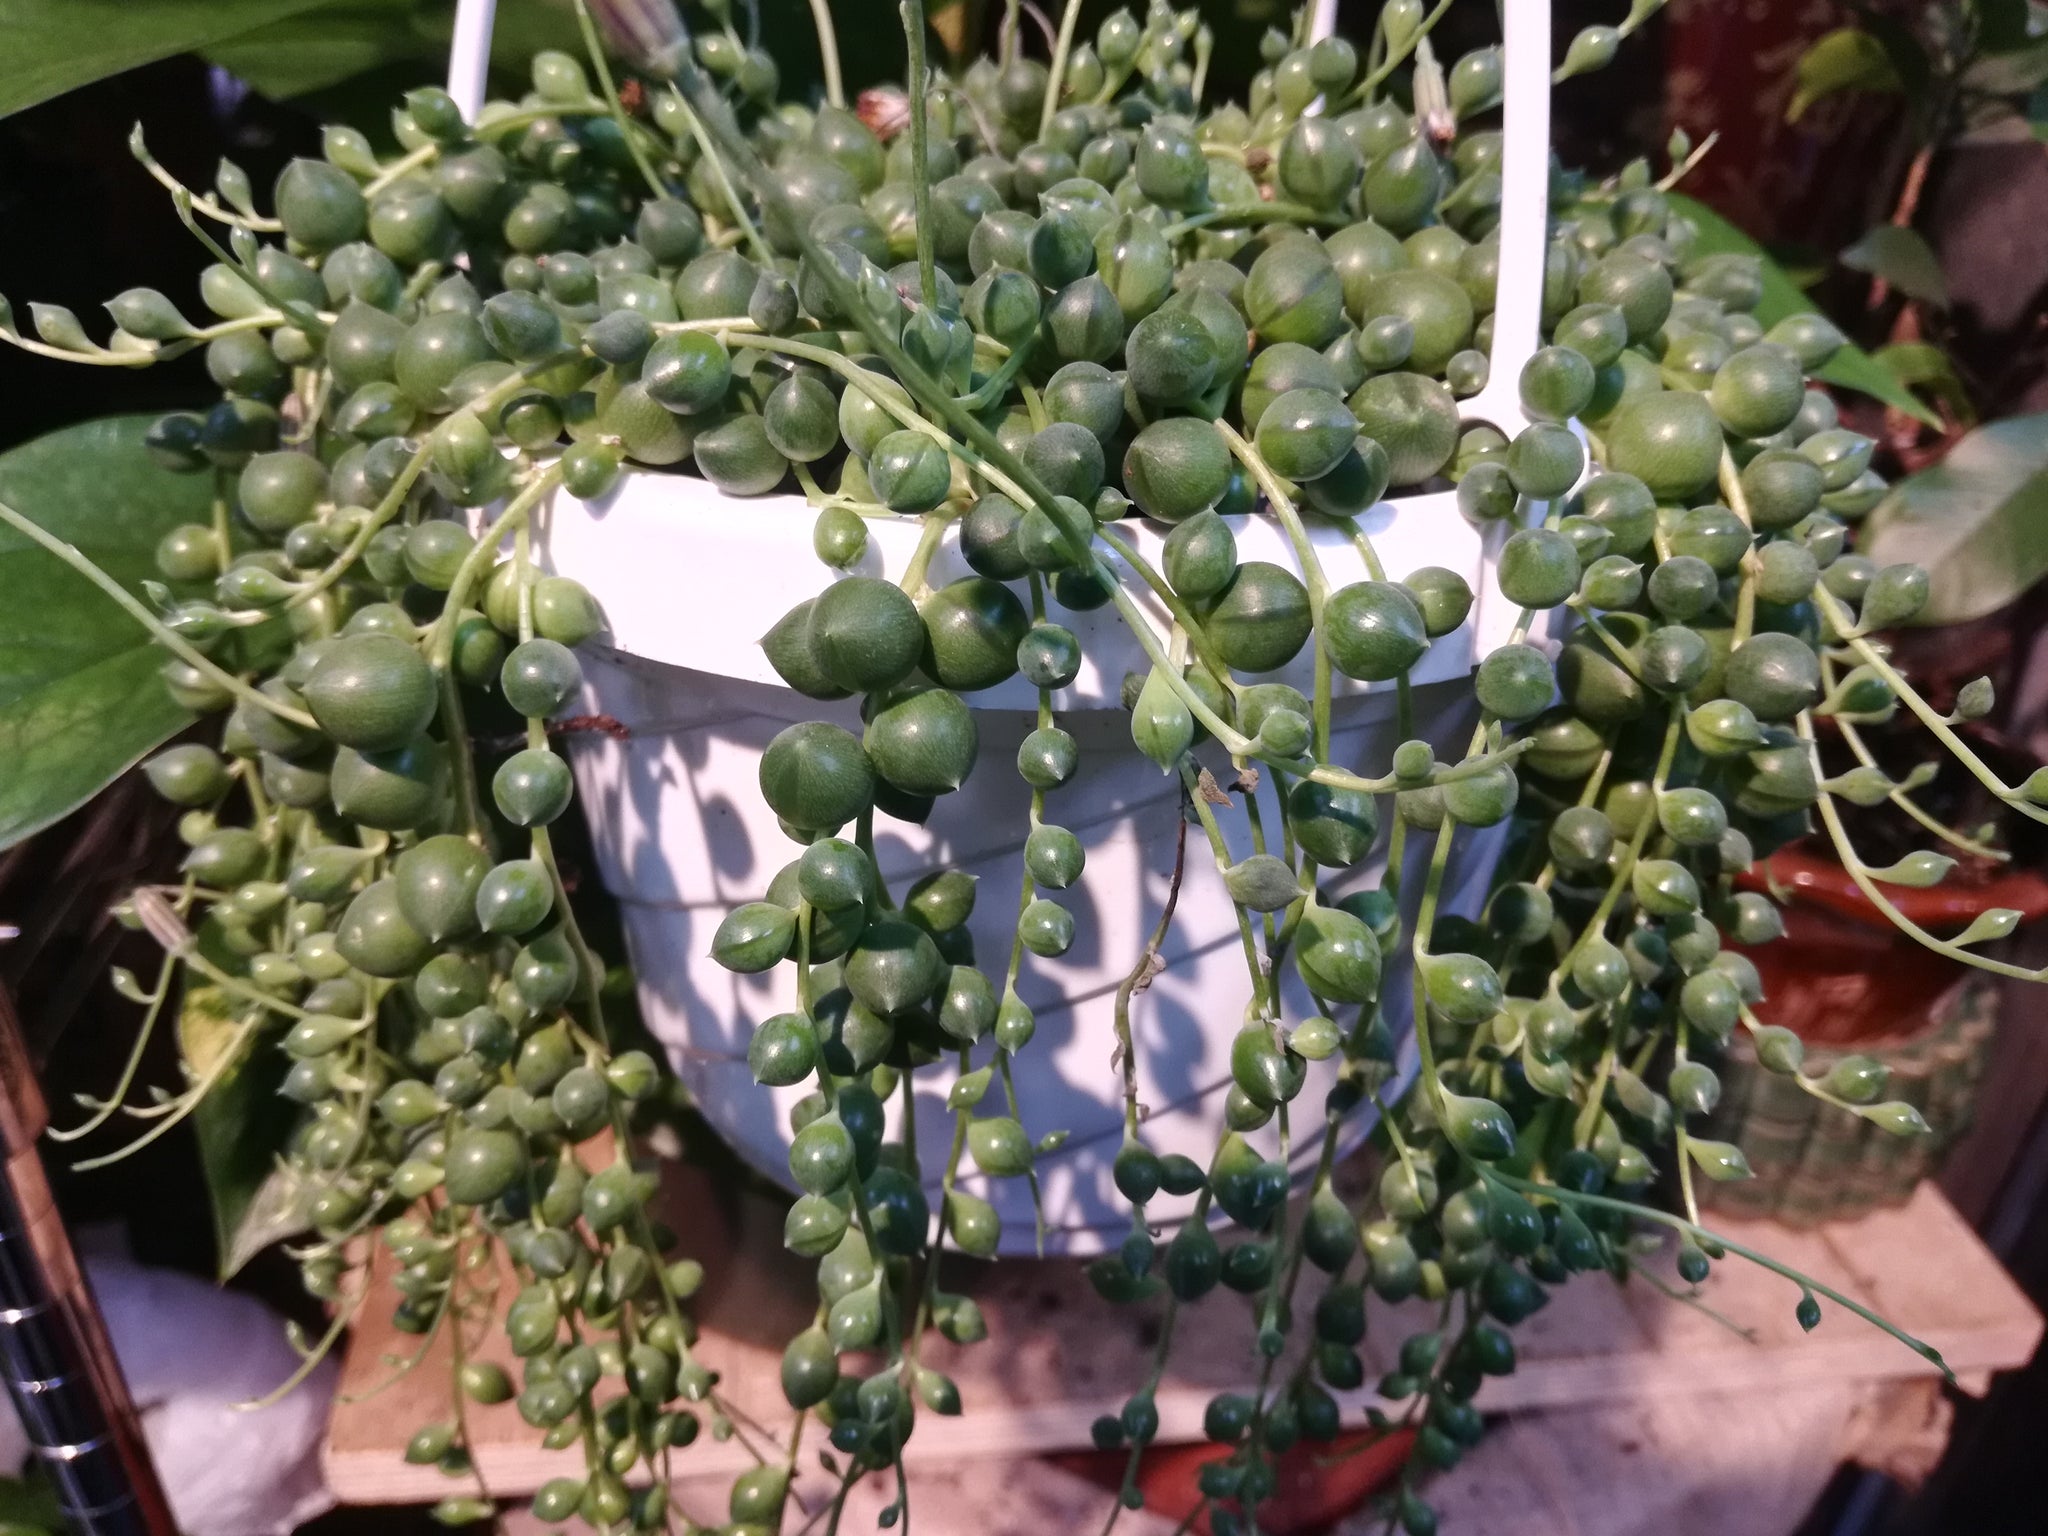 Plant-o-Pedia: String of Pearls – Jungalow